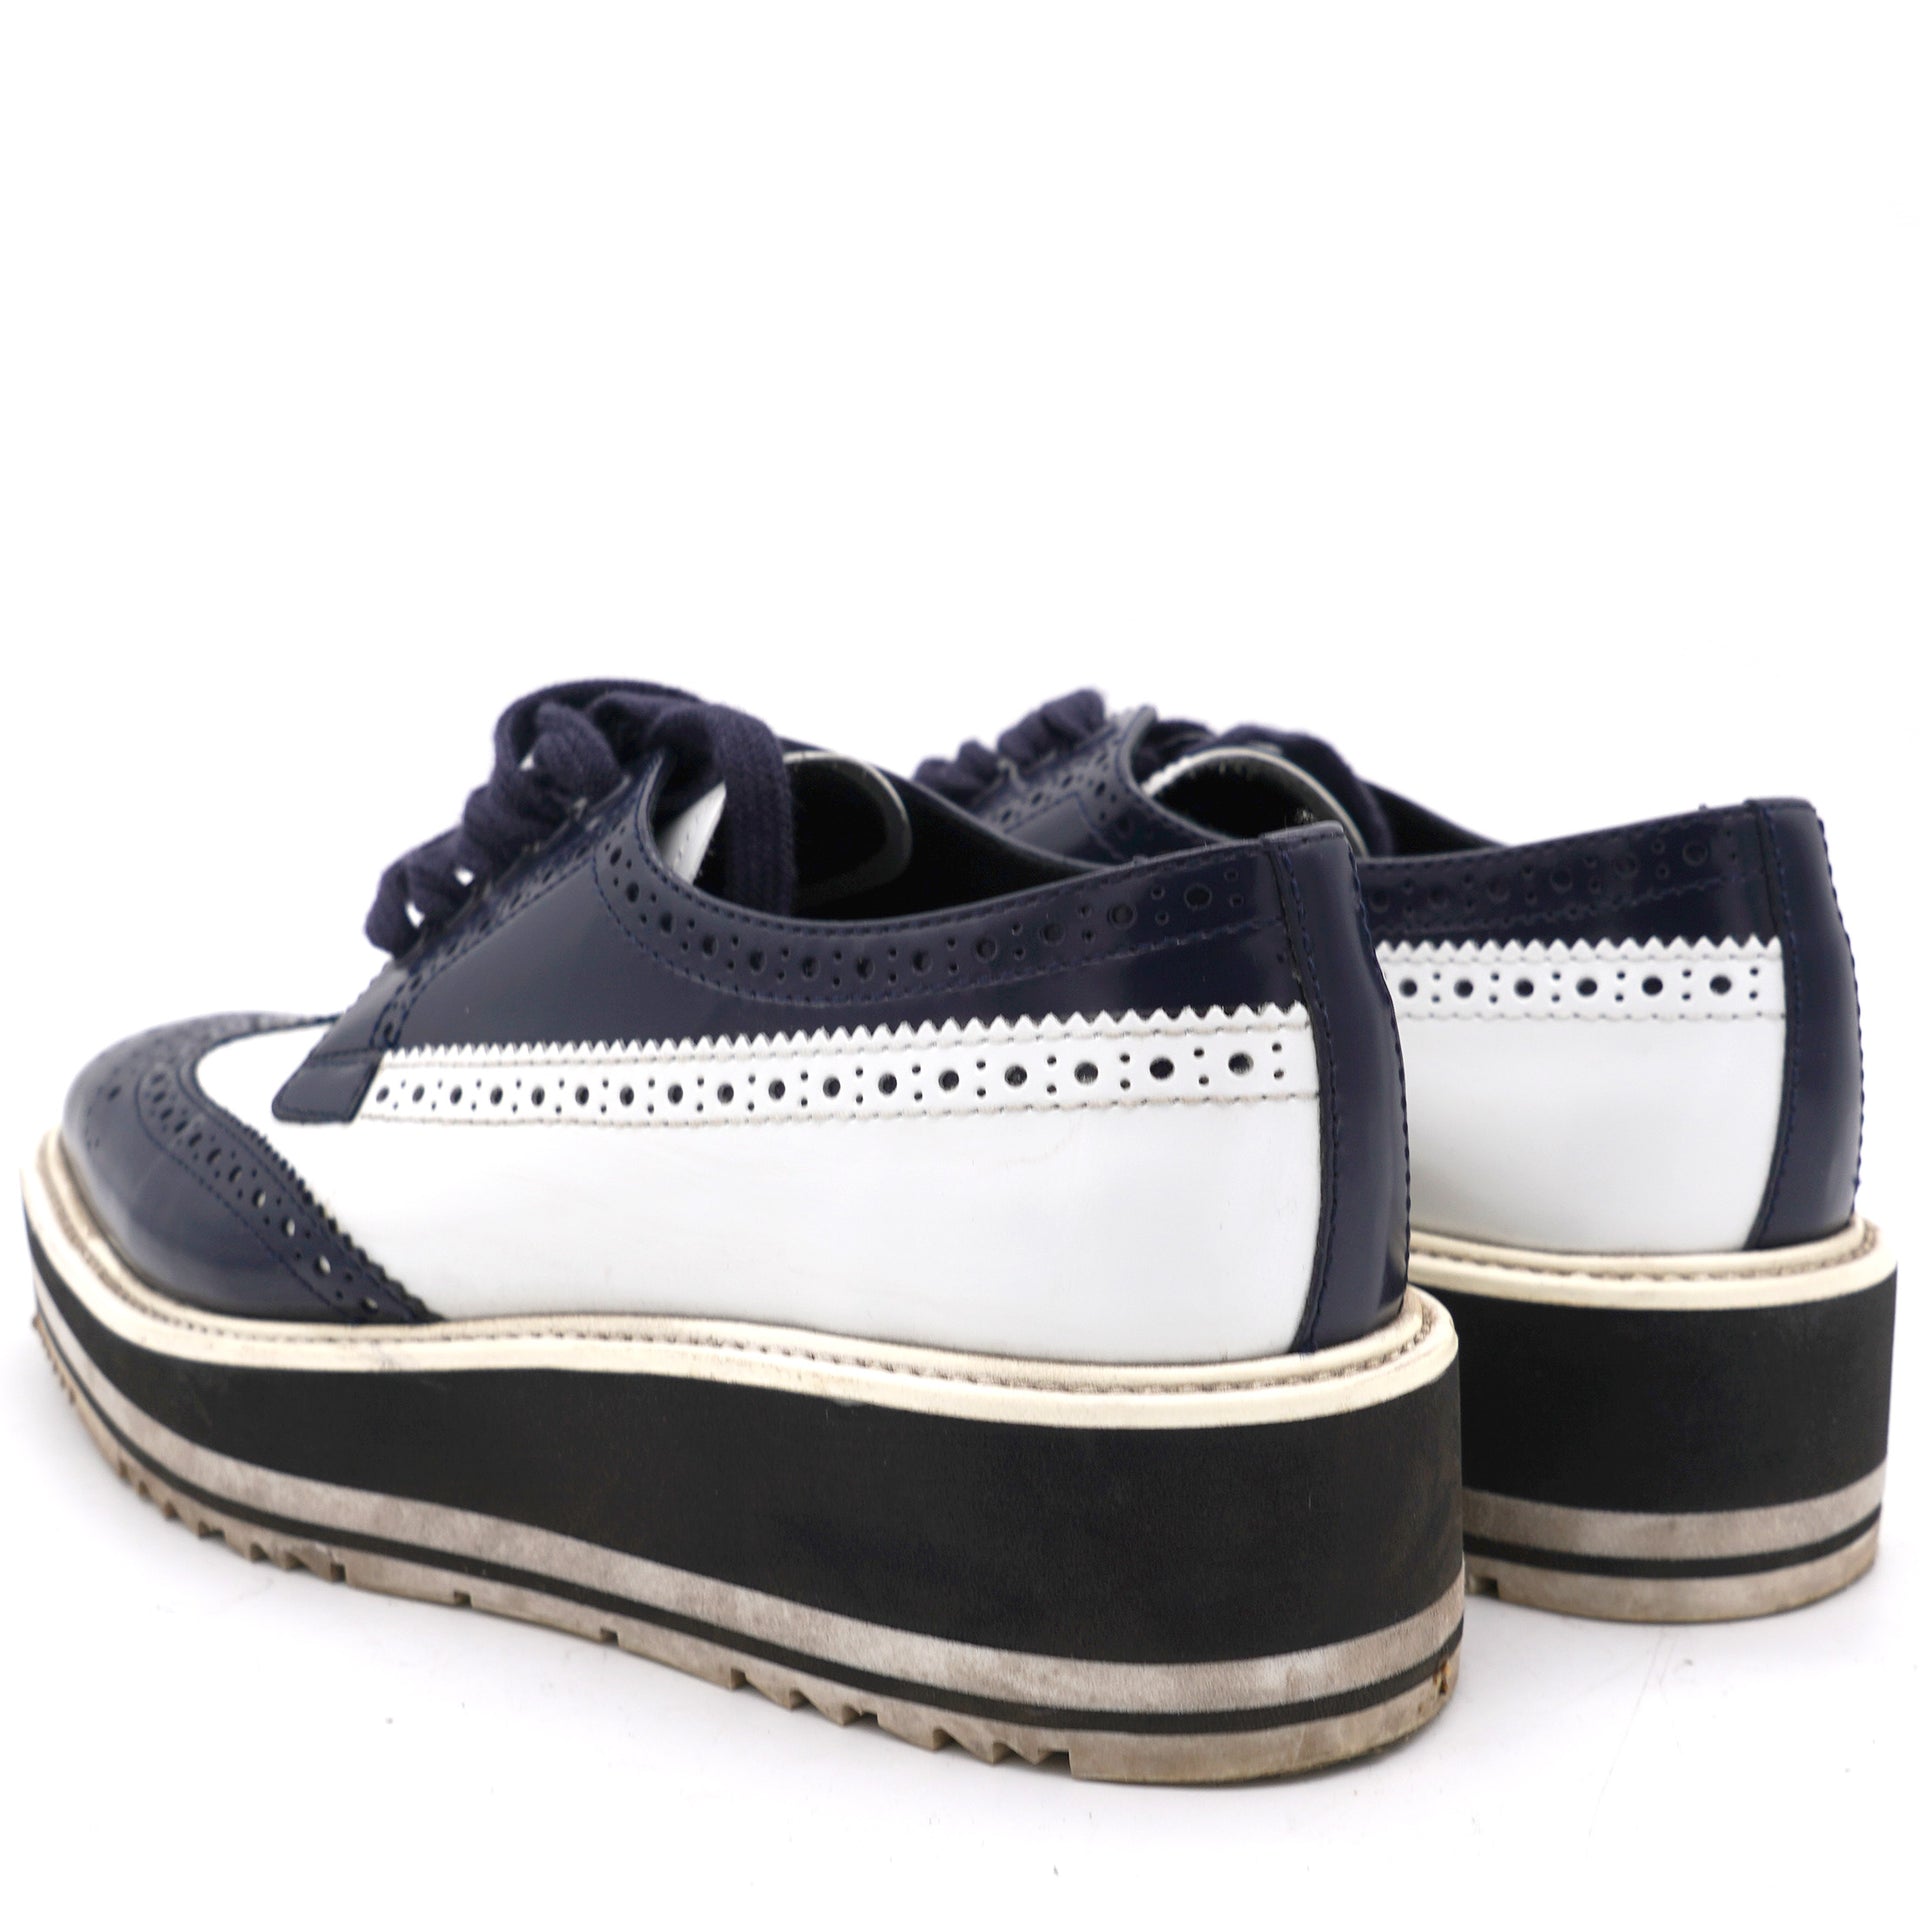 Navy/White Leather Lace-Up Derby Shoe 37.5